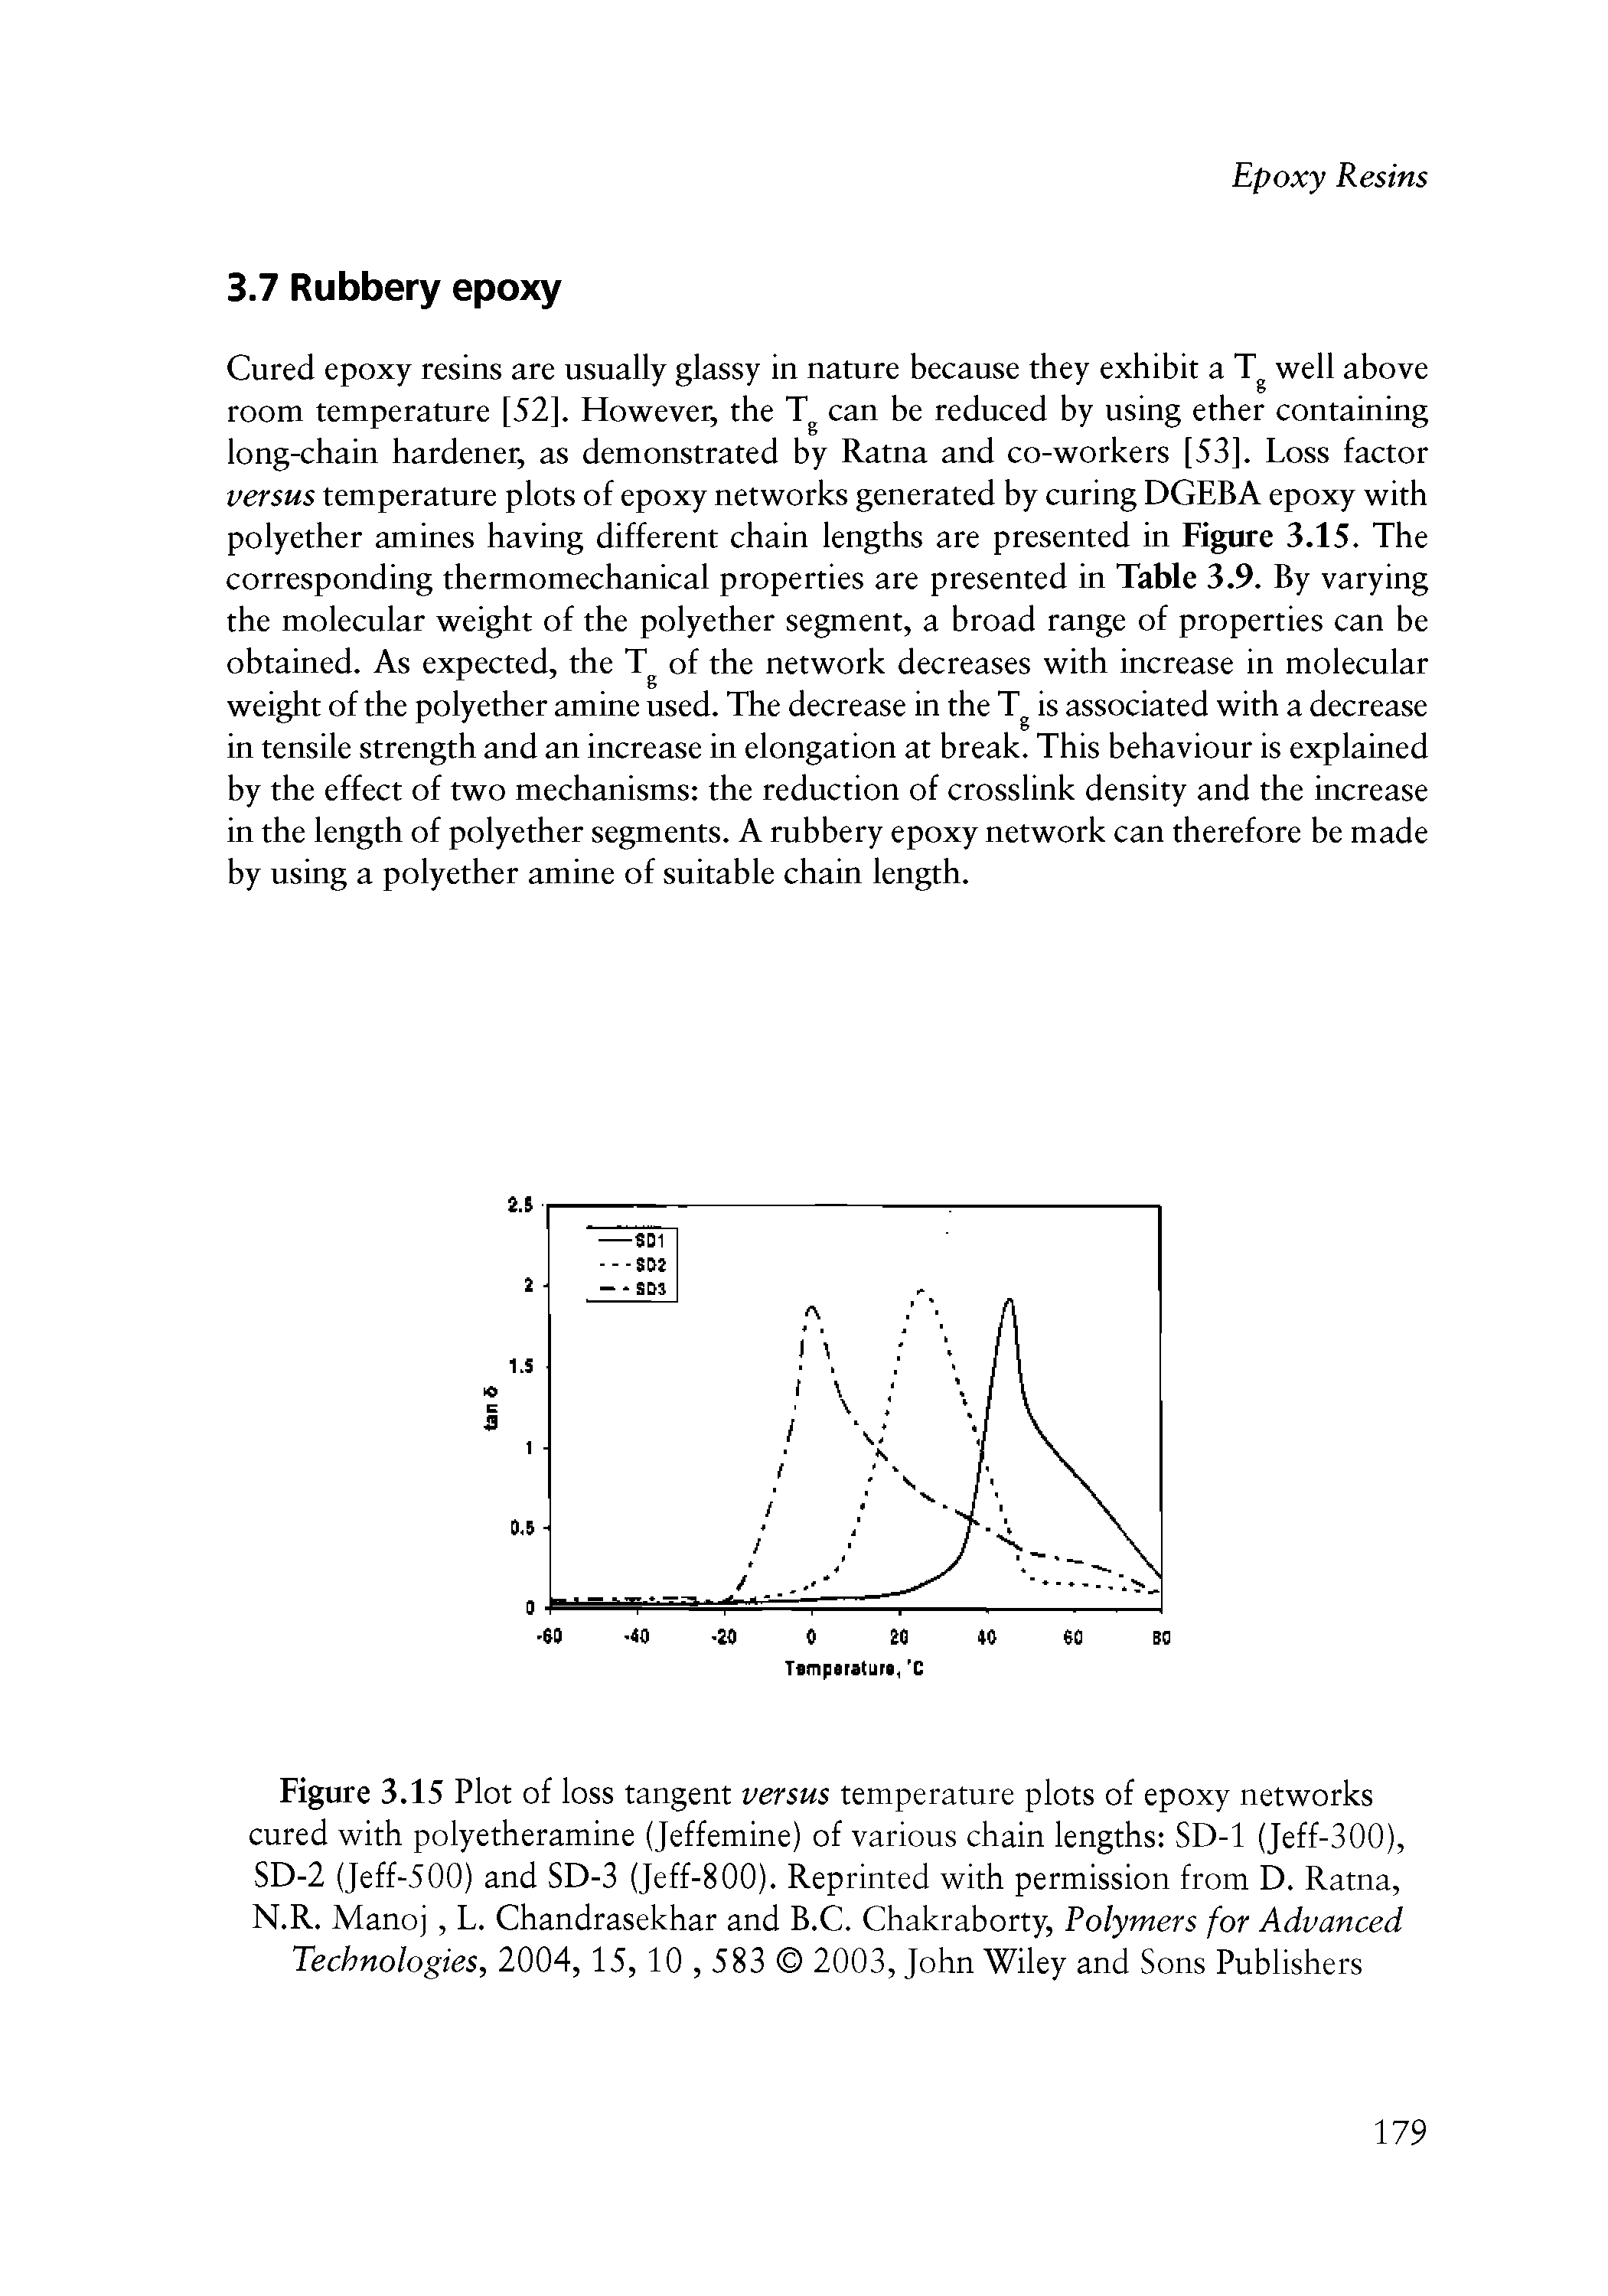 Figure 3.15 Plot of loss tangent versus temperature plots of epoxy networks cured with polyetheramine (Jeffemine) of various chain lengths SD-1 (Jeff-300), SD-2 (Jeff-500) and SD-3 (Jeff-800). Reprinted with permission from D. Ratna, N.R. Manoj, L. Chandrasekhar and B.C. Chakraborty, Polymers for Advanced Technologies, 2004, 15, 10,583 2003, John Wiley and Sons Publishers...